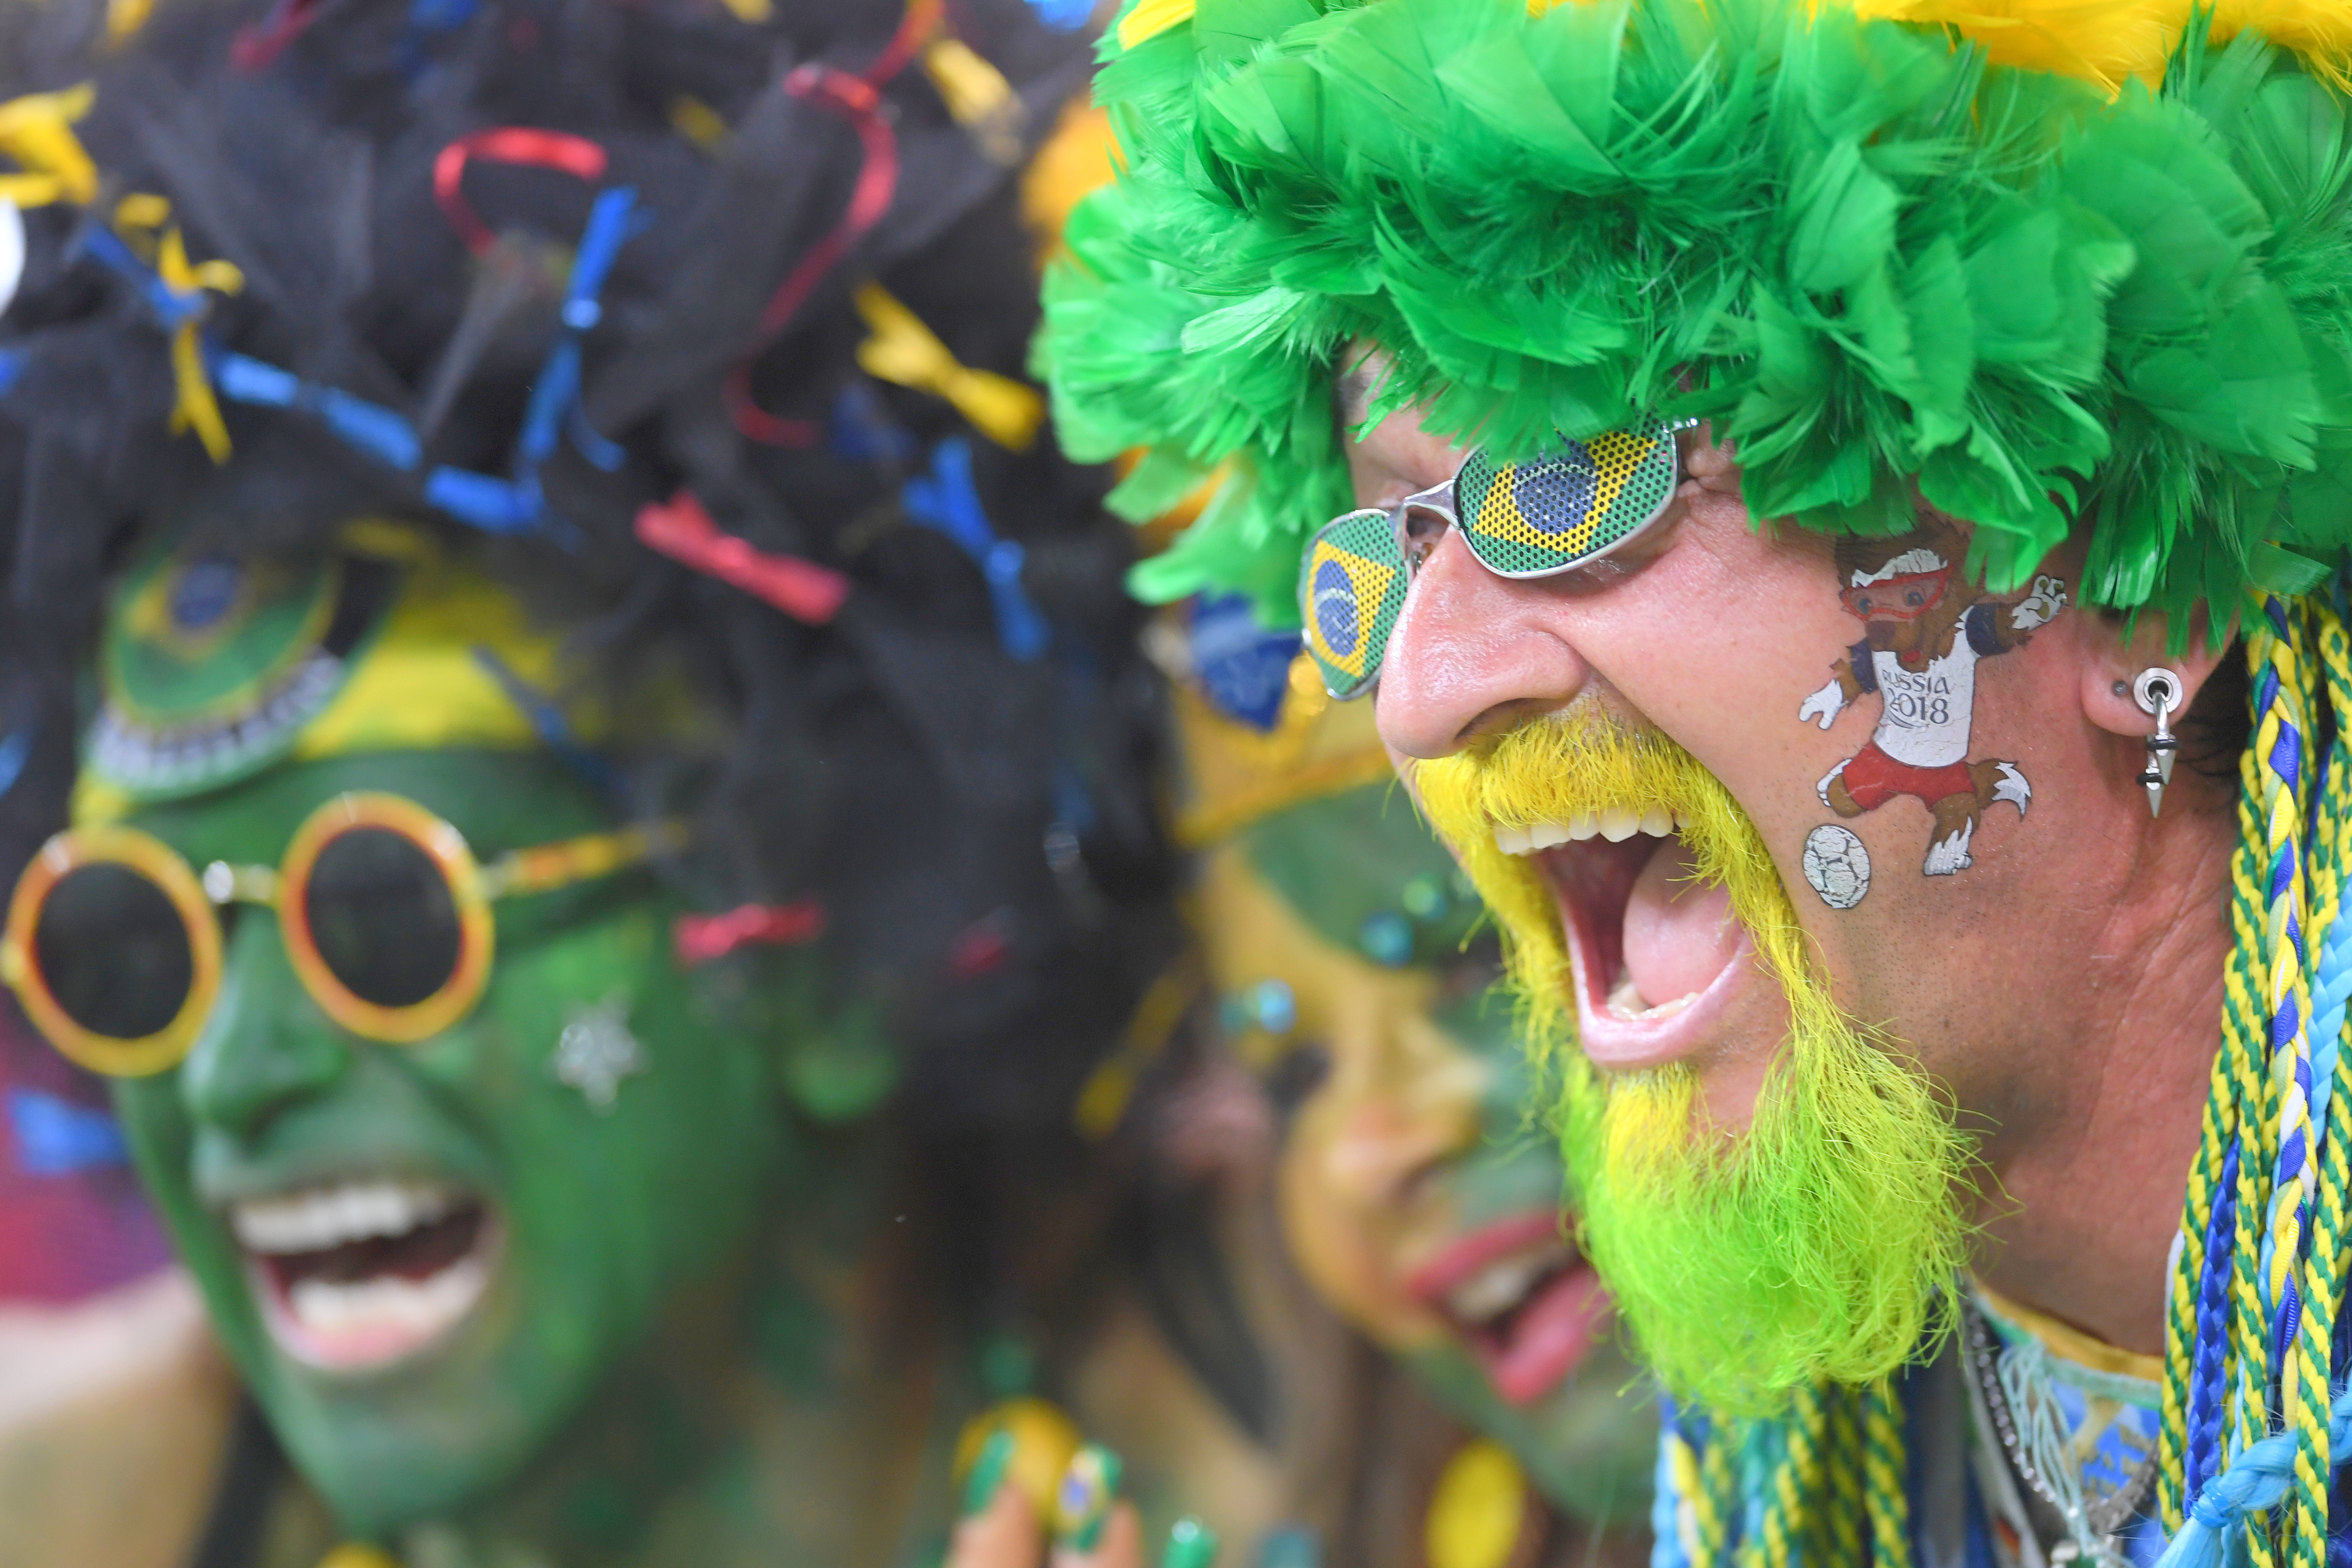 Brazil fans enjoy the pre match atmosphere prior to a FIFA World Cup match